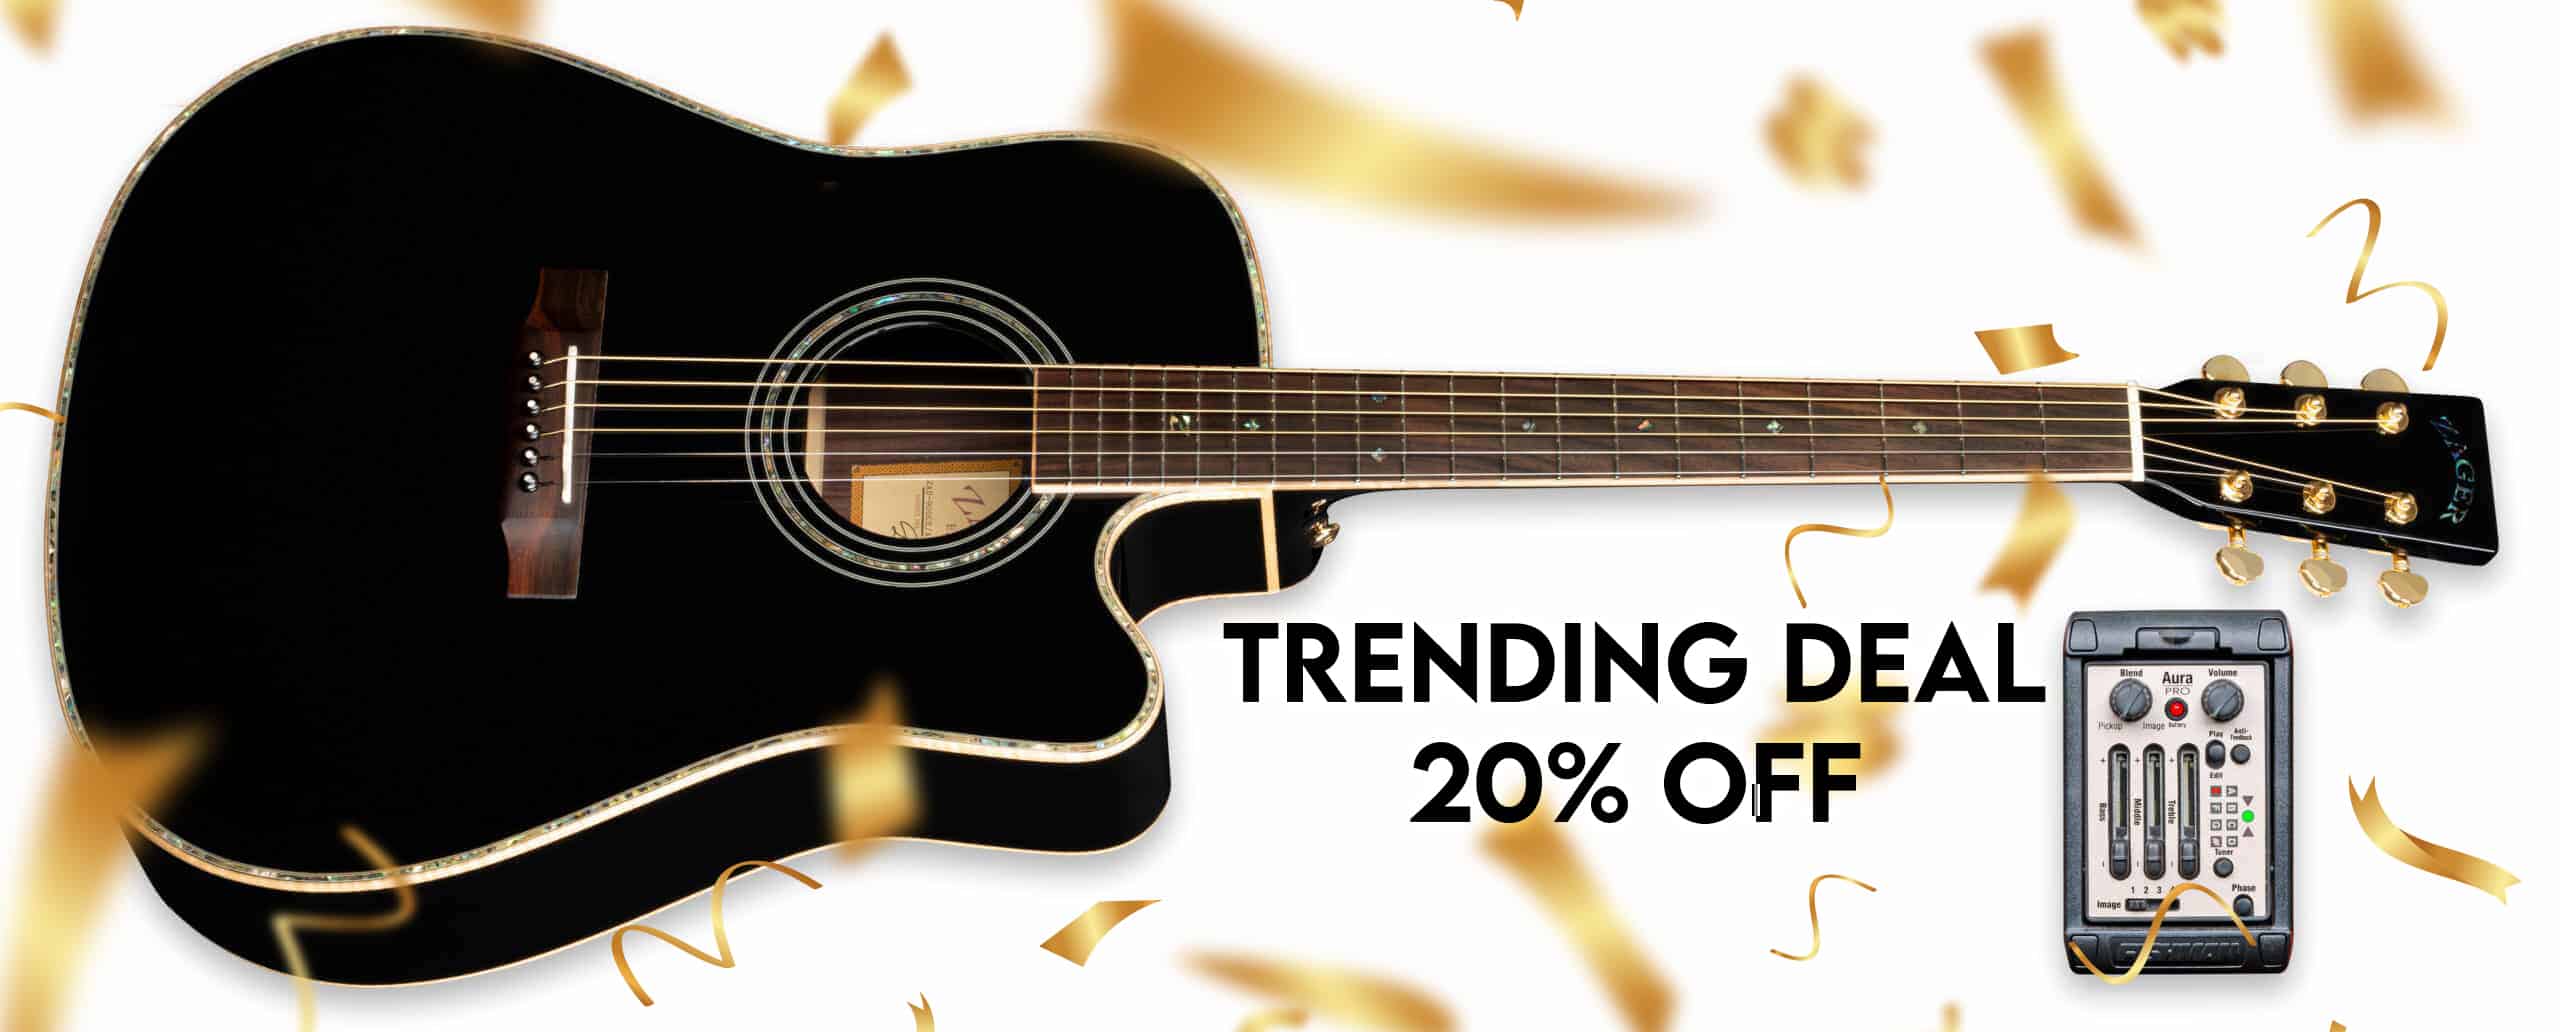 ZAD900CE Solid Spruce/Rosewood Acoustic Electric AURA Pro Series Limited Edition Black Lacquer